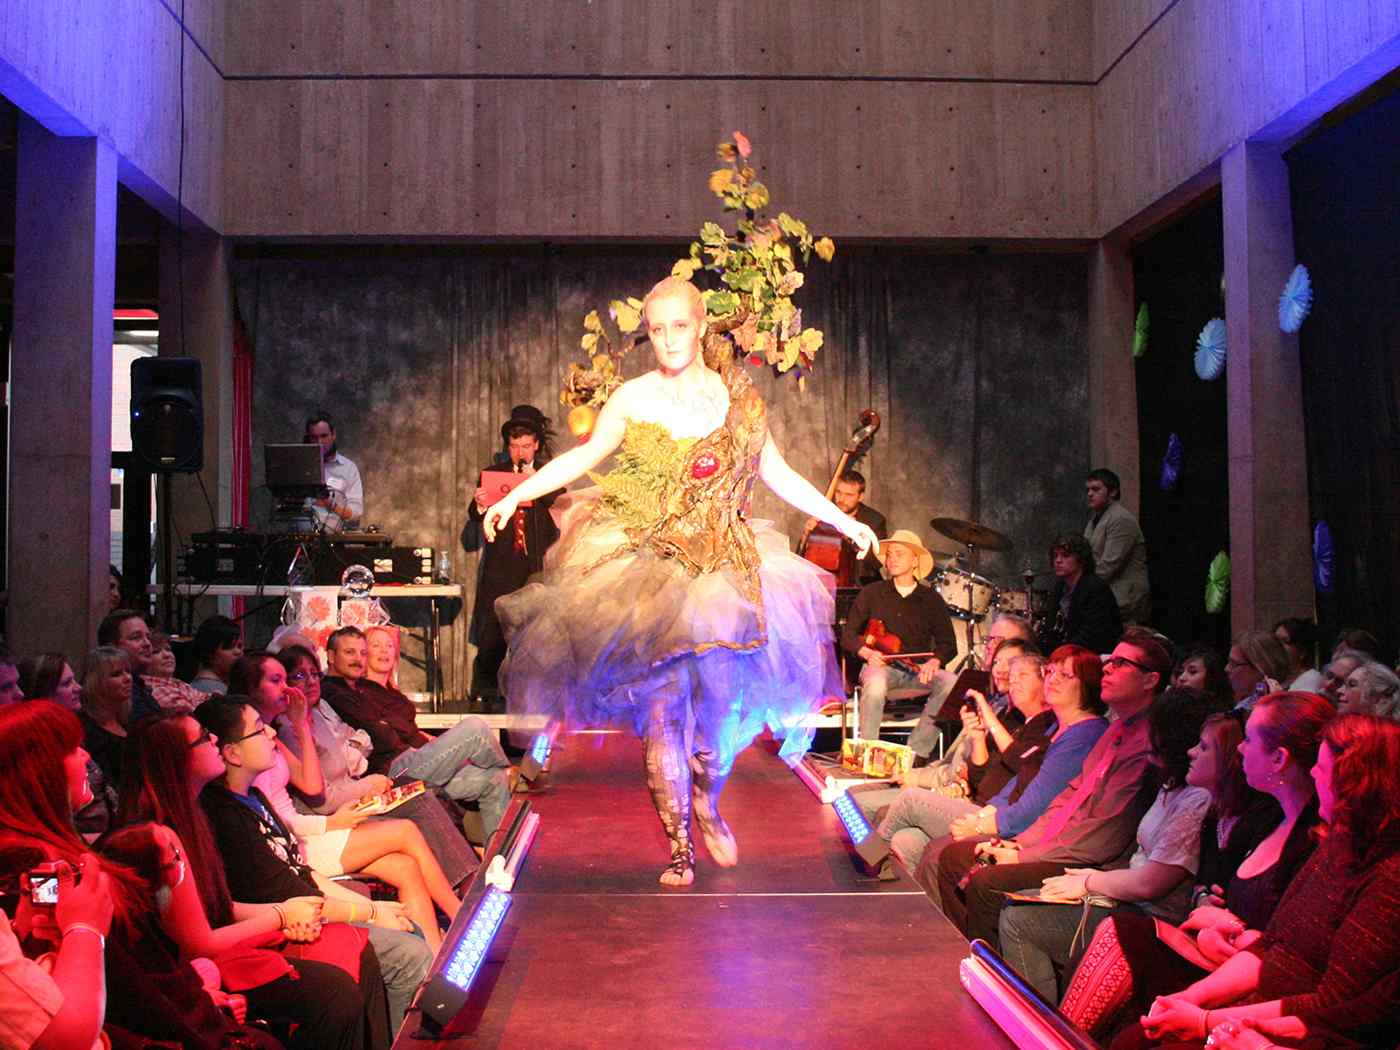 Student taking part in a theatrical production on a catwalk-like structure.